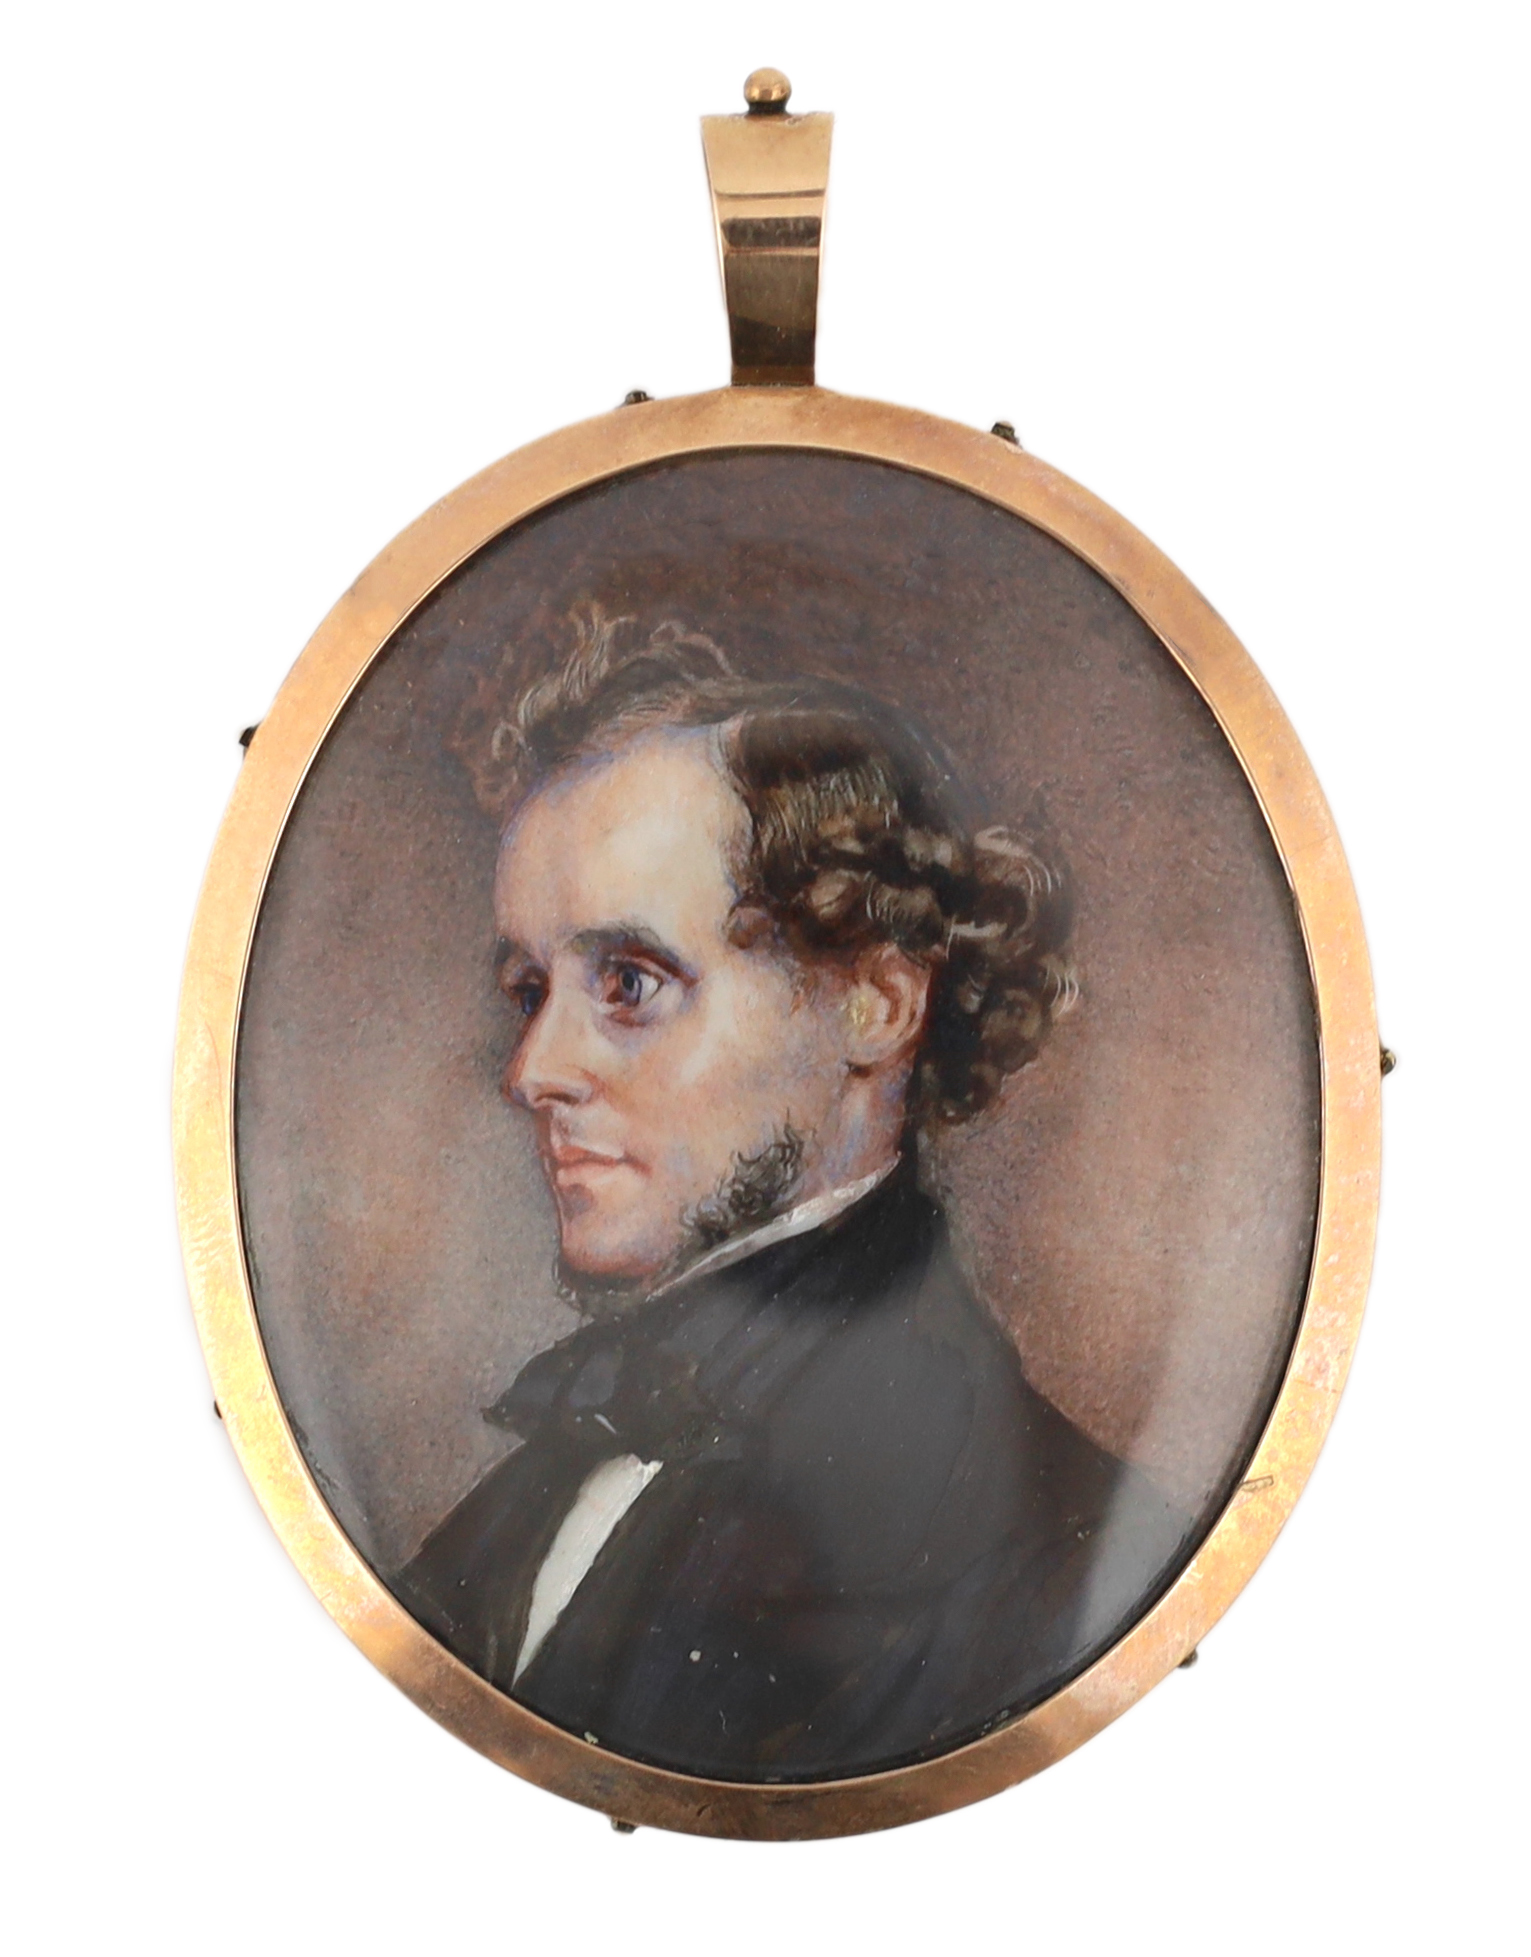 Late 19th century American School (?), Portrait miniature of a gentleman, watercolour on ivory, 5.5 x 4.5cm. CITES Submission reference AEX6KNR9